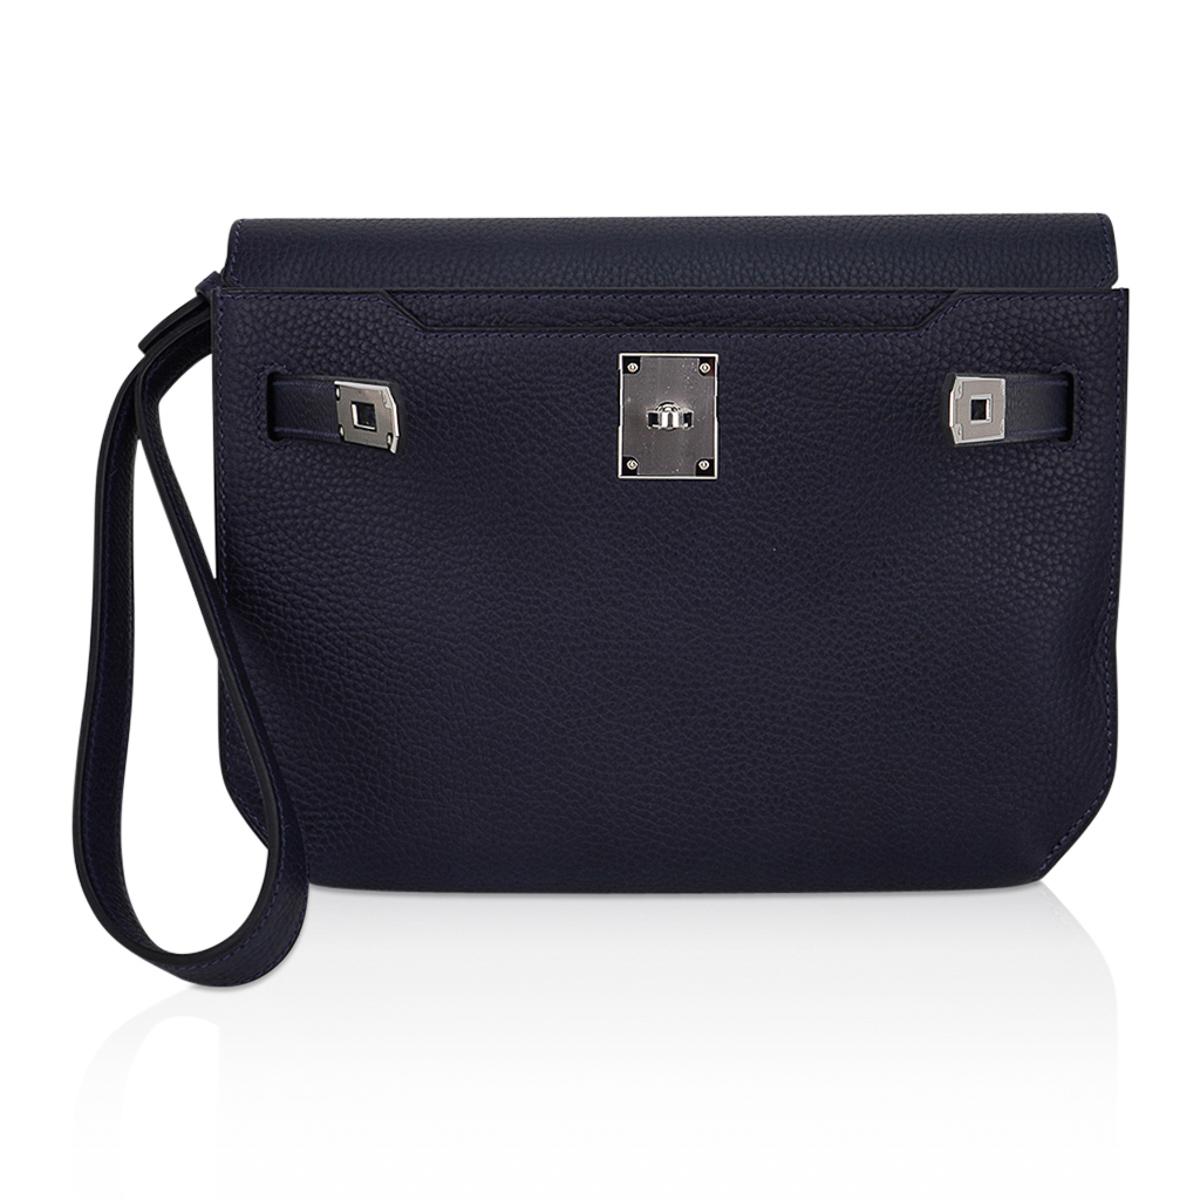 Mightychic offers an Hermes Kelly Depeches 25 Pouch featured in Bleu Indigo very rare Galop D'Hermes Vache leather.
Timeless richly saturated very dark blue.
This exquisite neutral bag is perfect for year round wear.
Fresh with Palladium